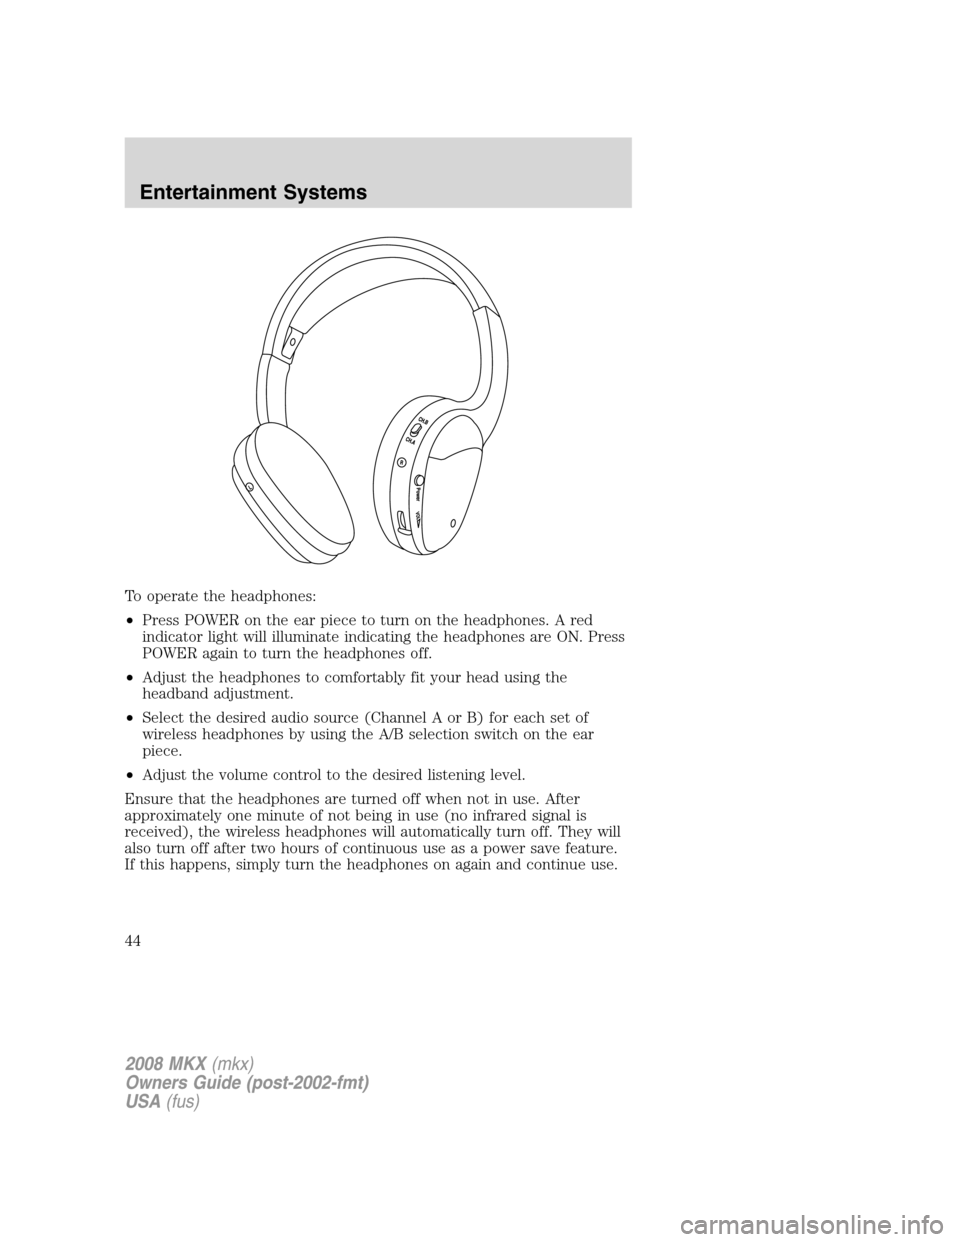 LINCOLN MKX 2008  Owners Manual To operate the headphones:
•Press POWER on the ear piece to turn on the headphones. A red
indicator light will illuminate indicating the headphones are ON. Press
POWER again to turn the headphones o